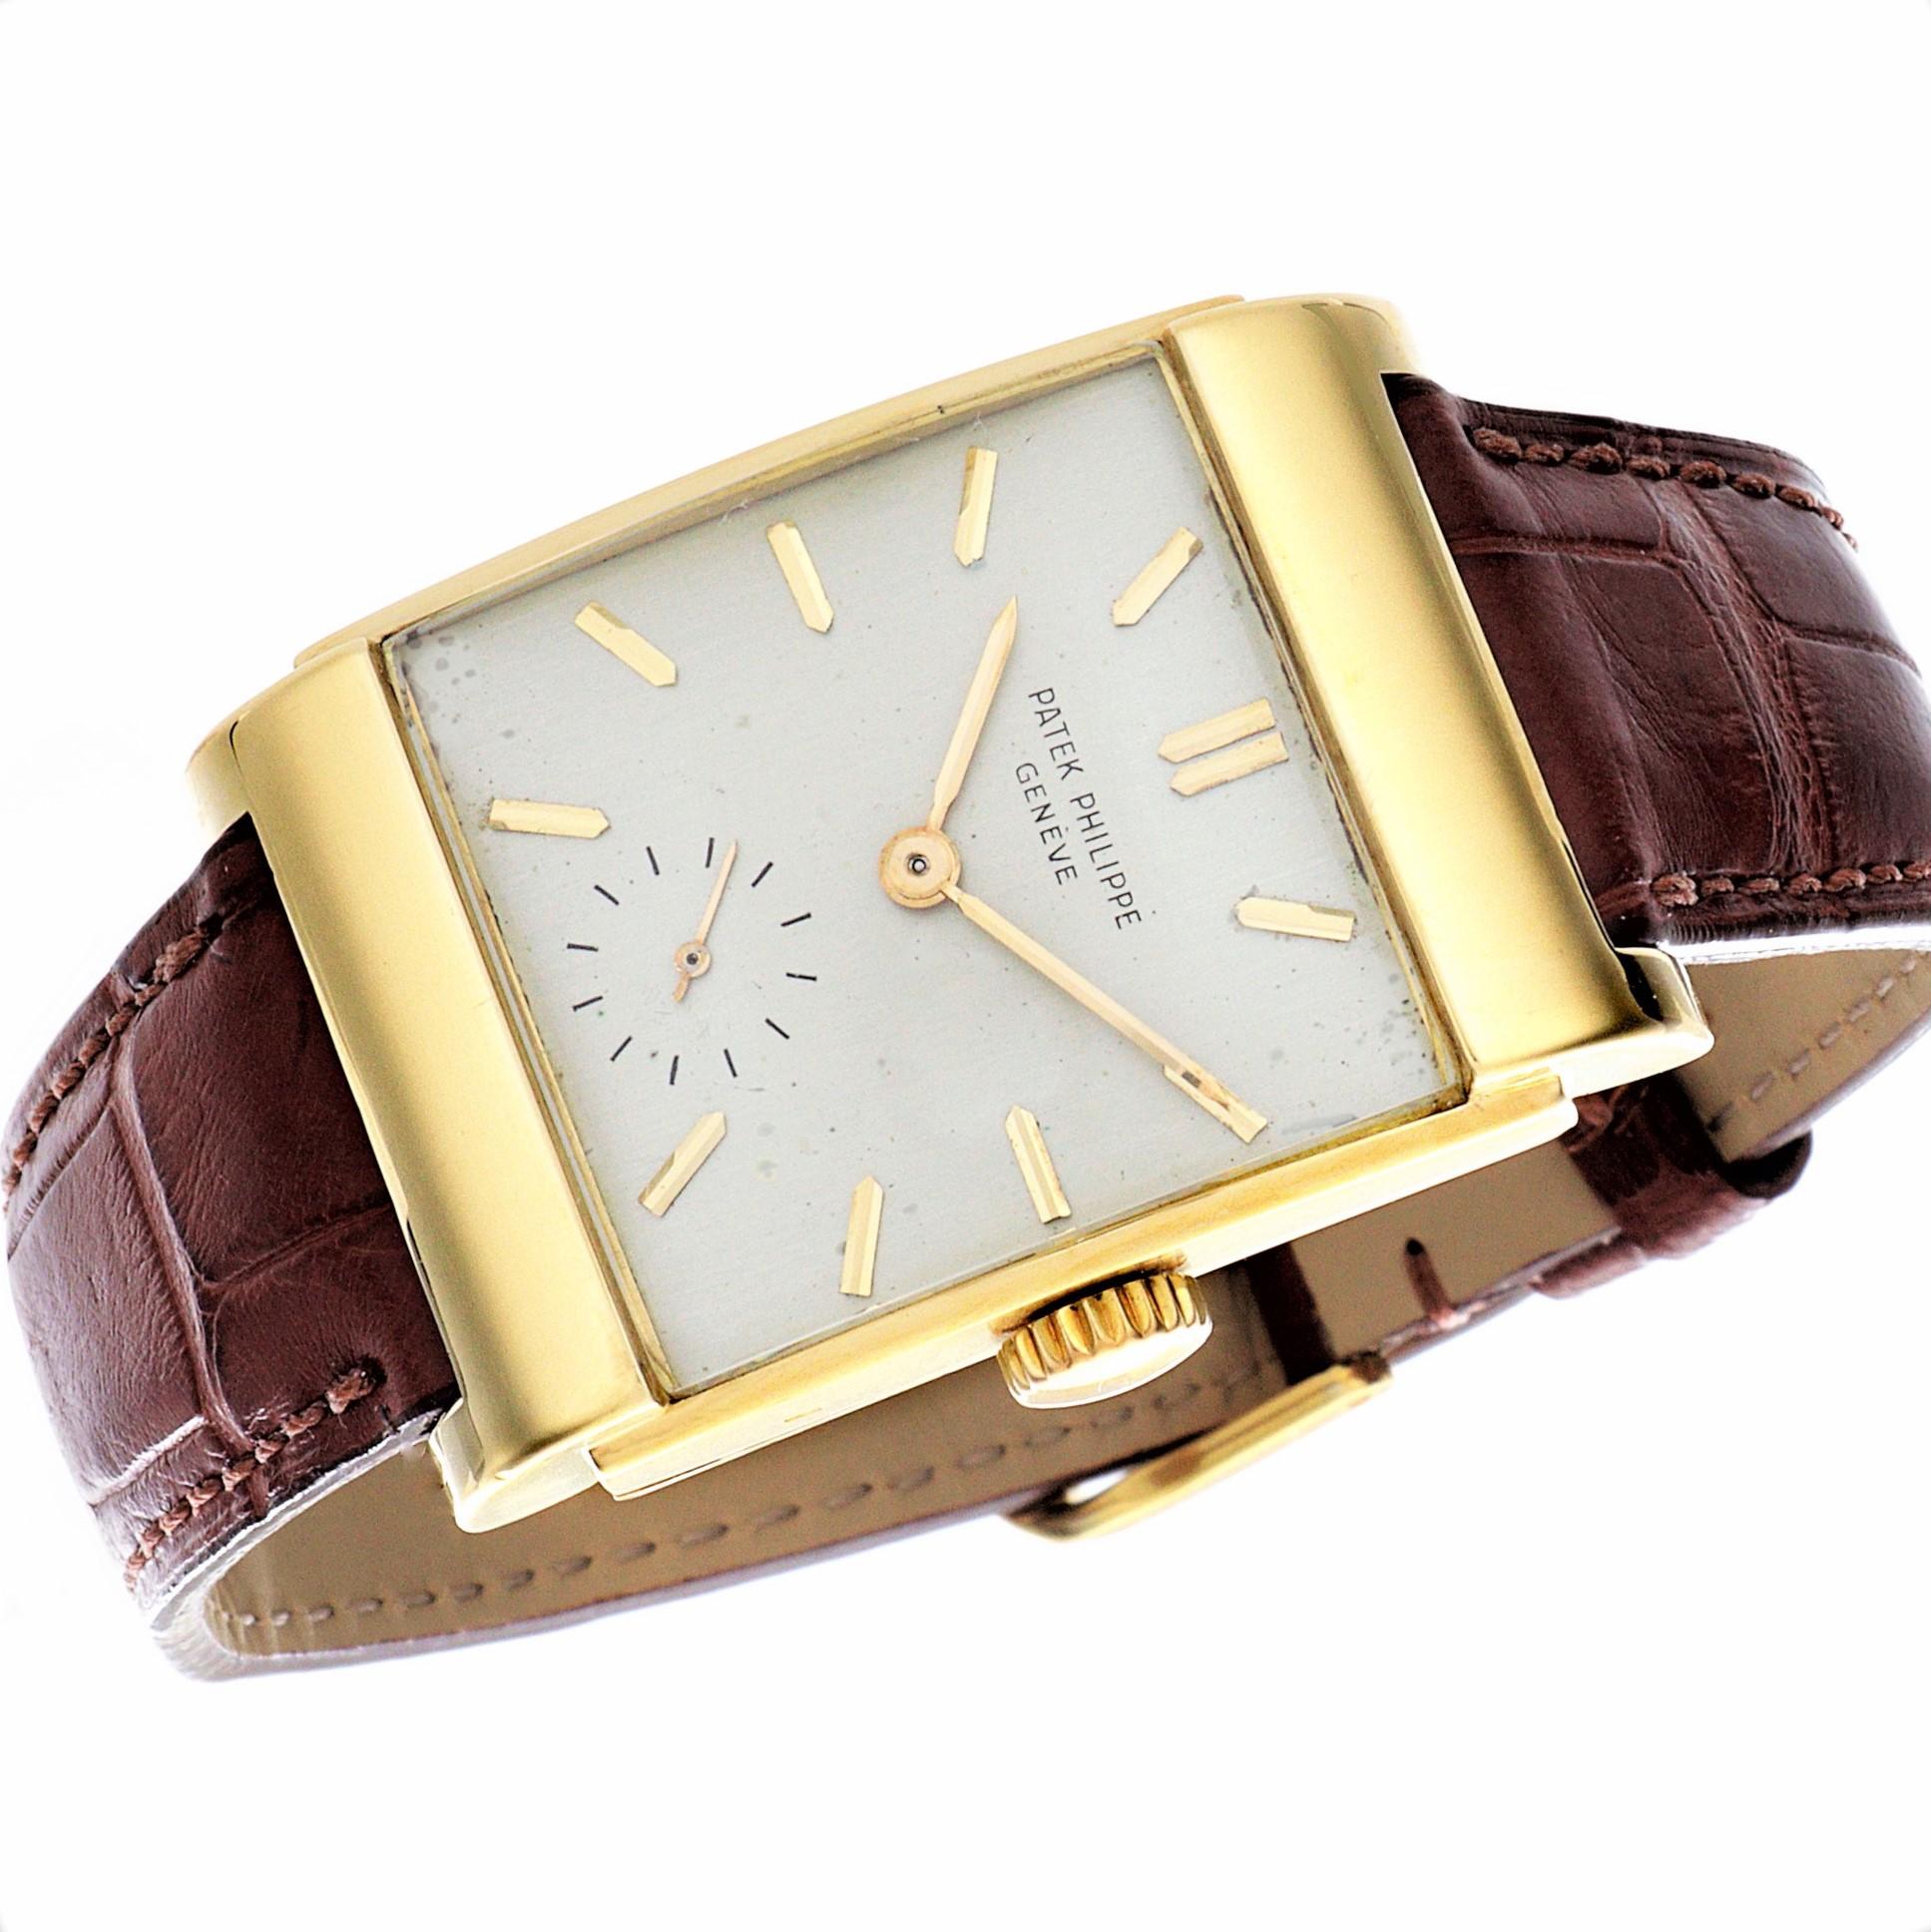 Introduction:
Patek Philippe 2479J Curved Rectangular watch with Stepped case and half hooded lugs.  The watch is made in18K yellow gold and measuring 39 x 26 mm and was made in 1950,  Fitted with a 9